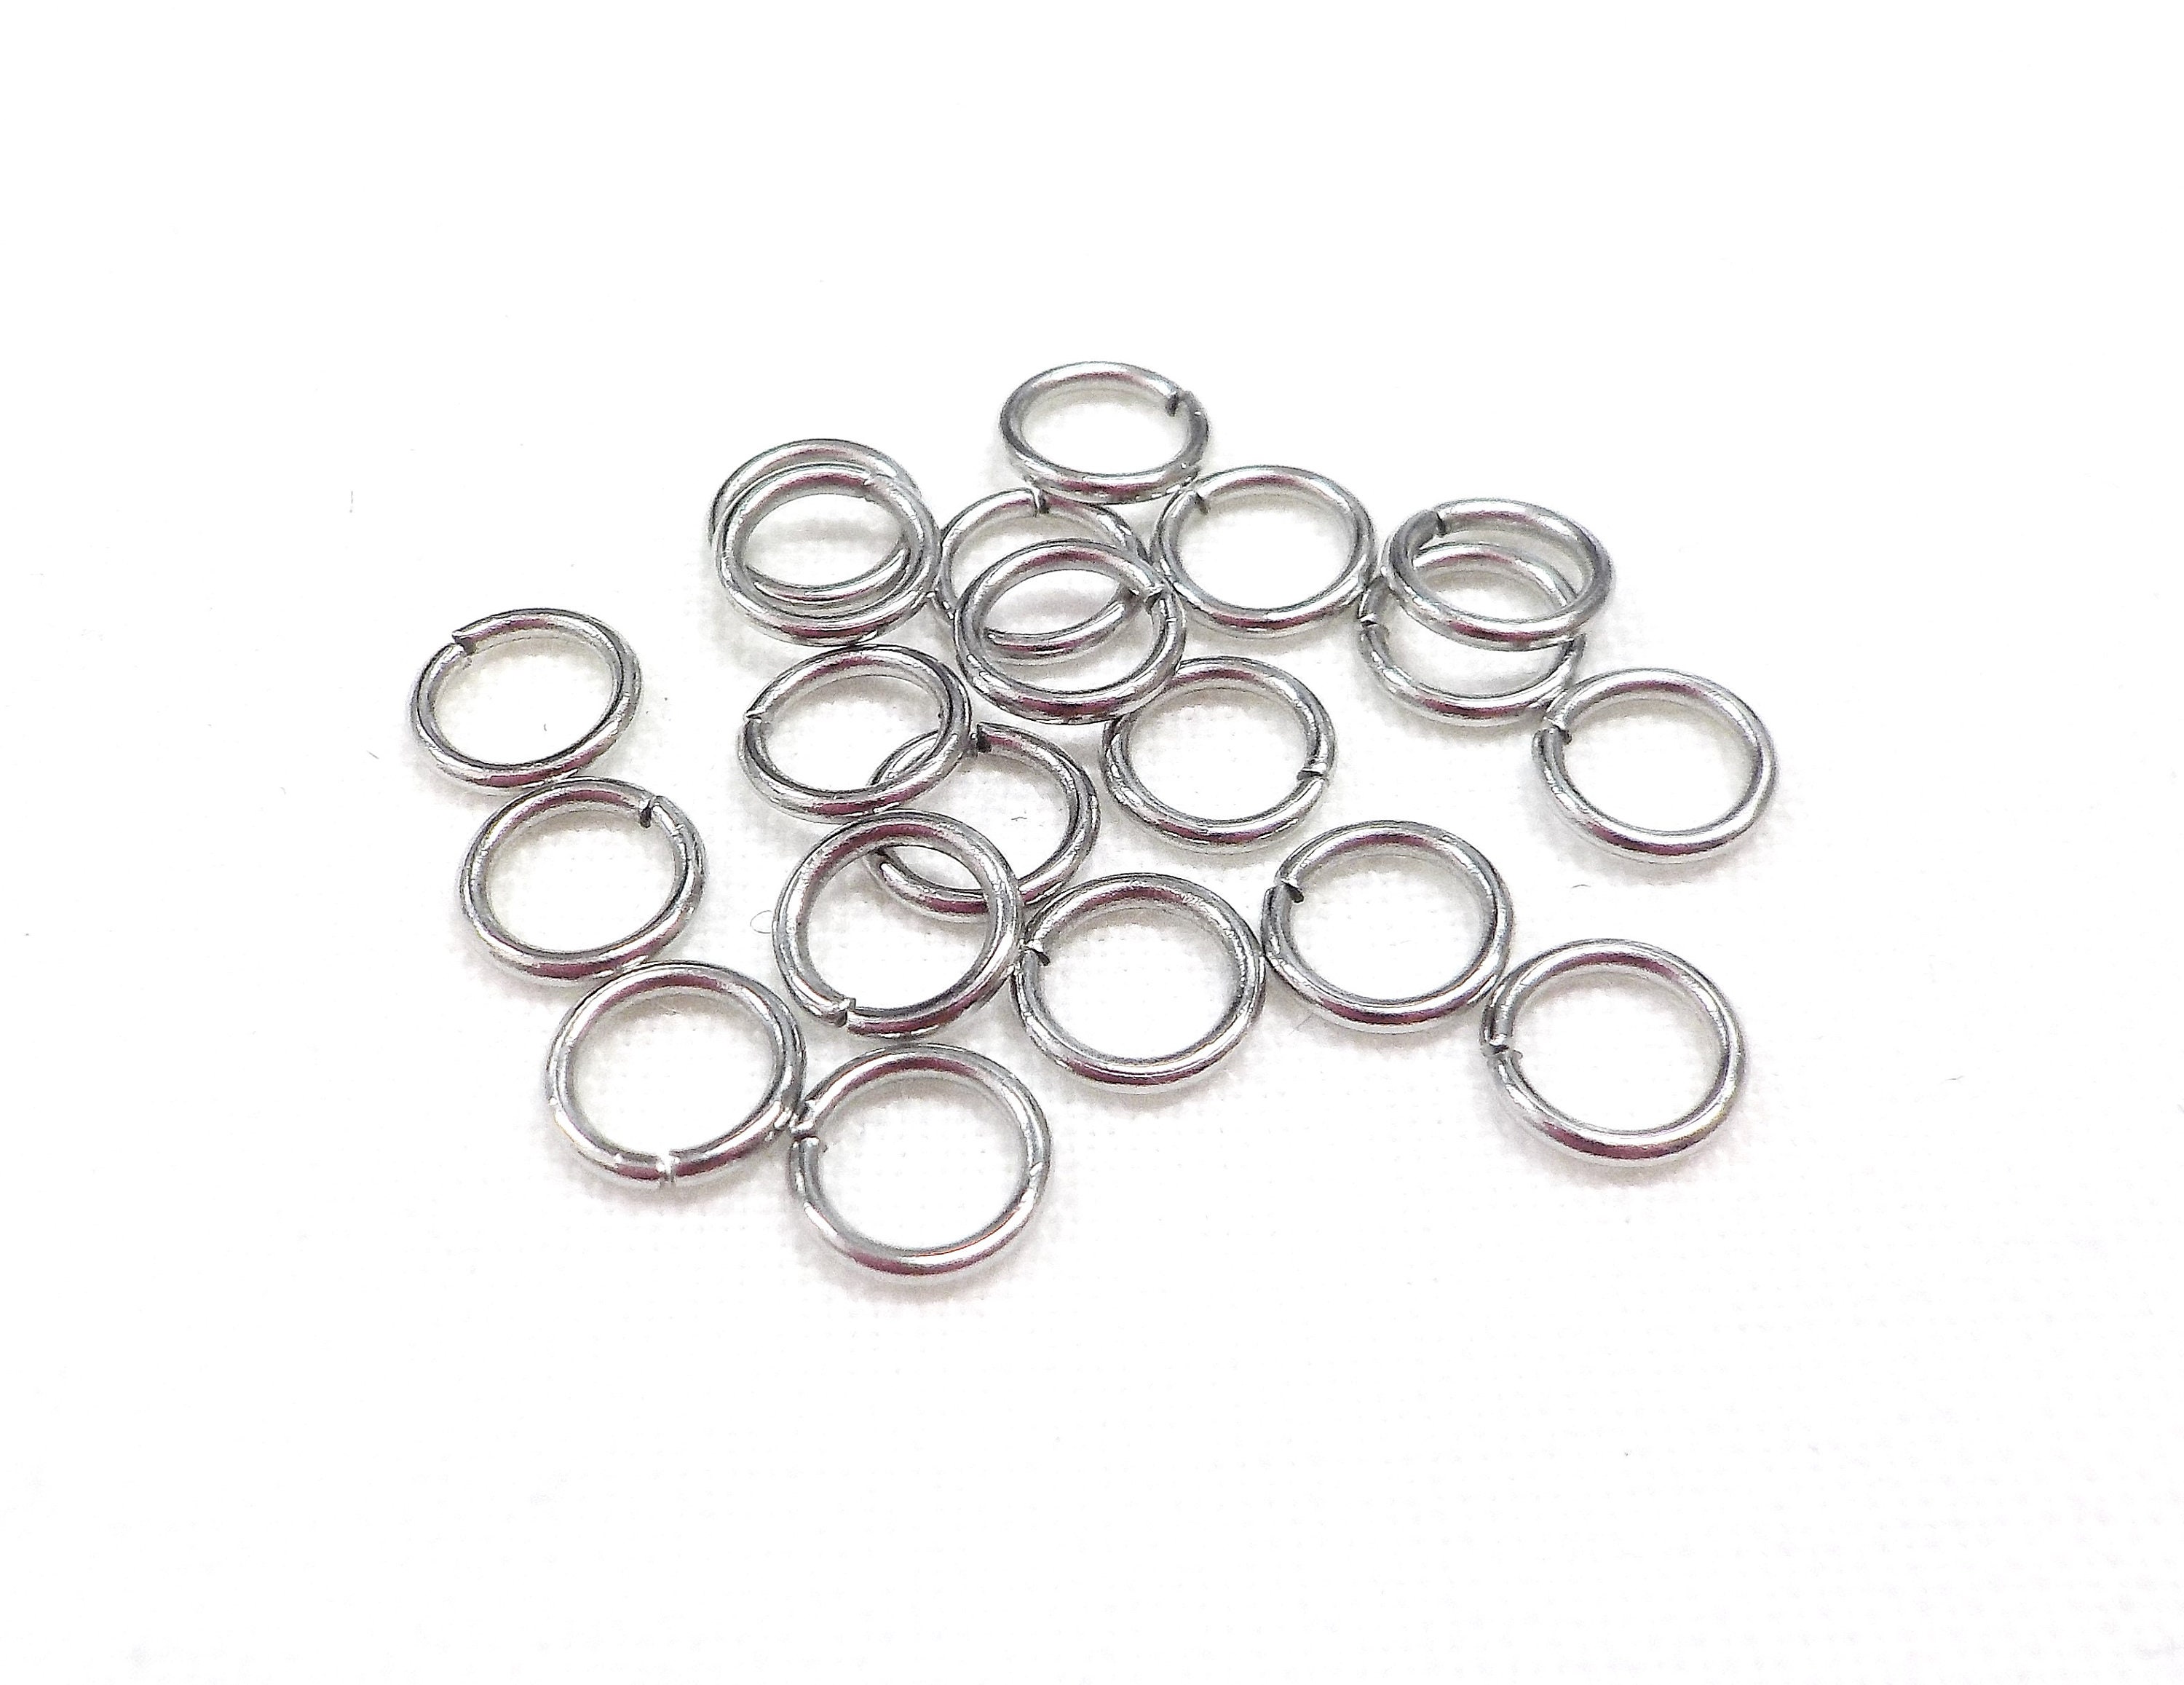 Metal O Rings, 12pcs 38mm(1.5) ID 4.6mm Thick Non-Welded O-Rings, Black